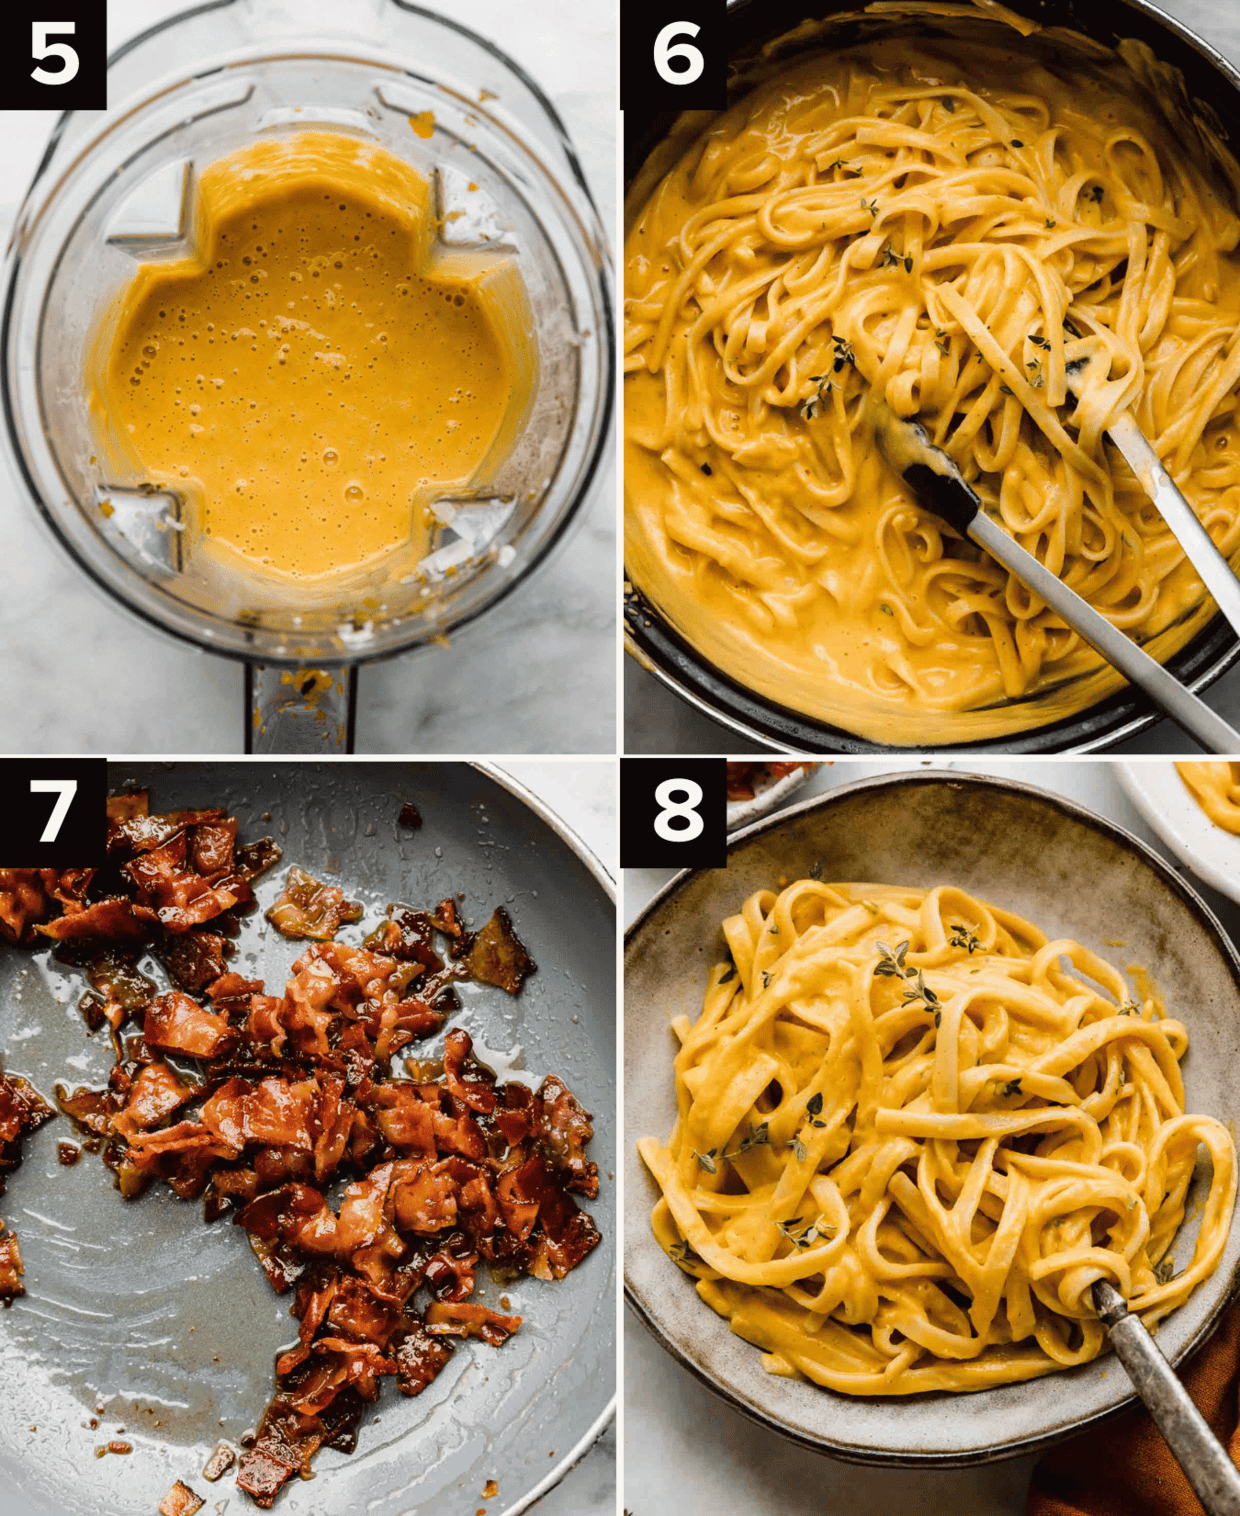 Four images showing how to make Alfredo butternut squash, top left image is creamy orange butternut squash sauce in a blender, top right is fettuccine noodles mixed in butternut squash sauce, both left is maple glazed bacon, bottom right photo is Butternut Squash Alfredo in a gray bowl.